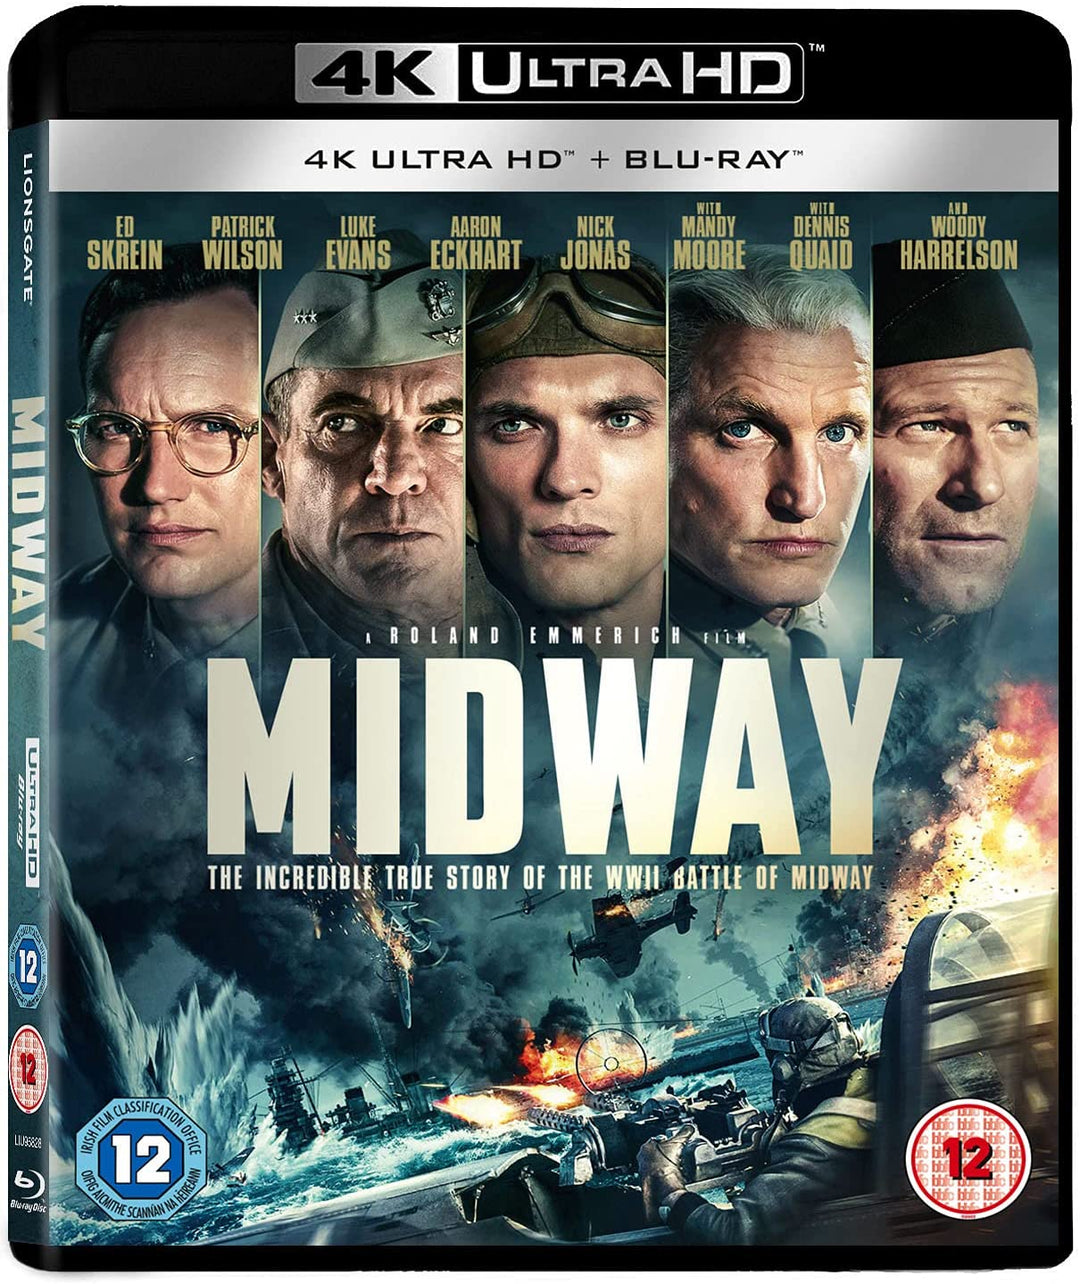 Midway 4K – Krieg/Action [Blu-Ray]